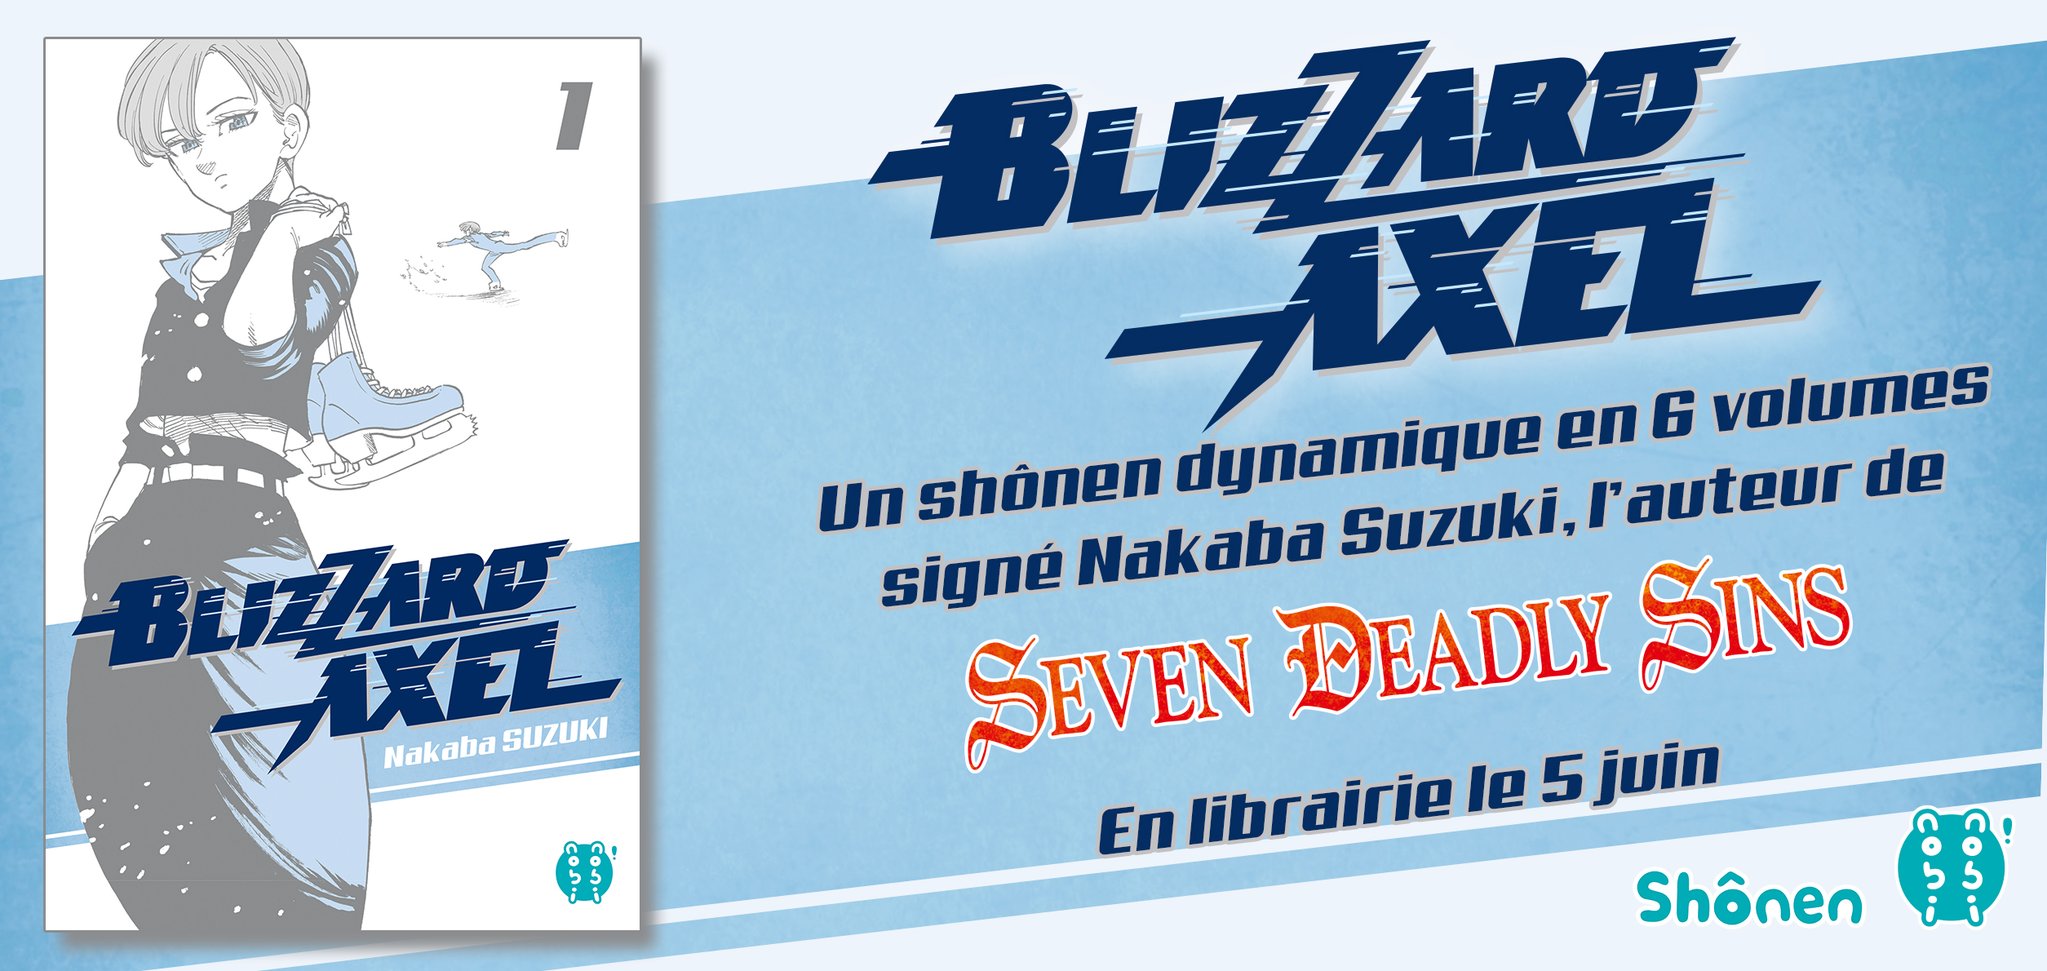 Blizzard Axel Annonce